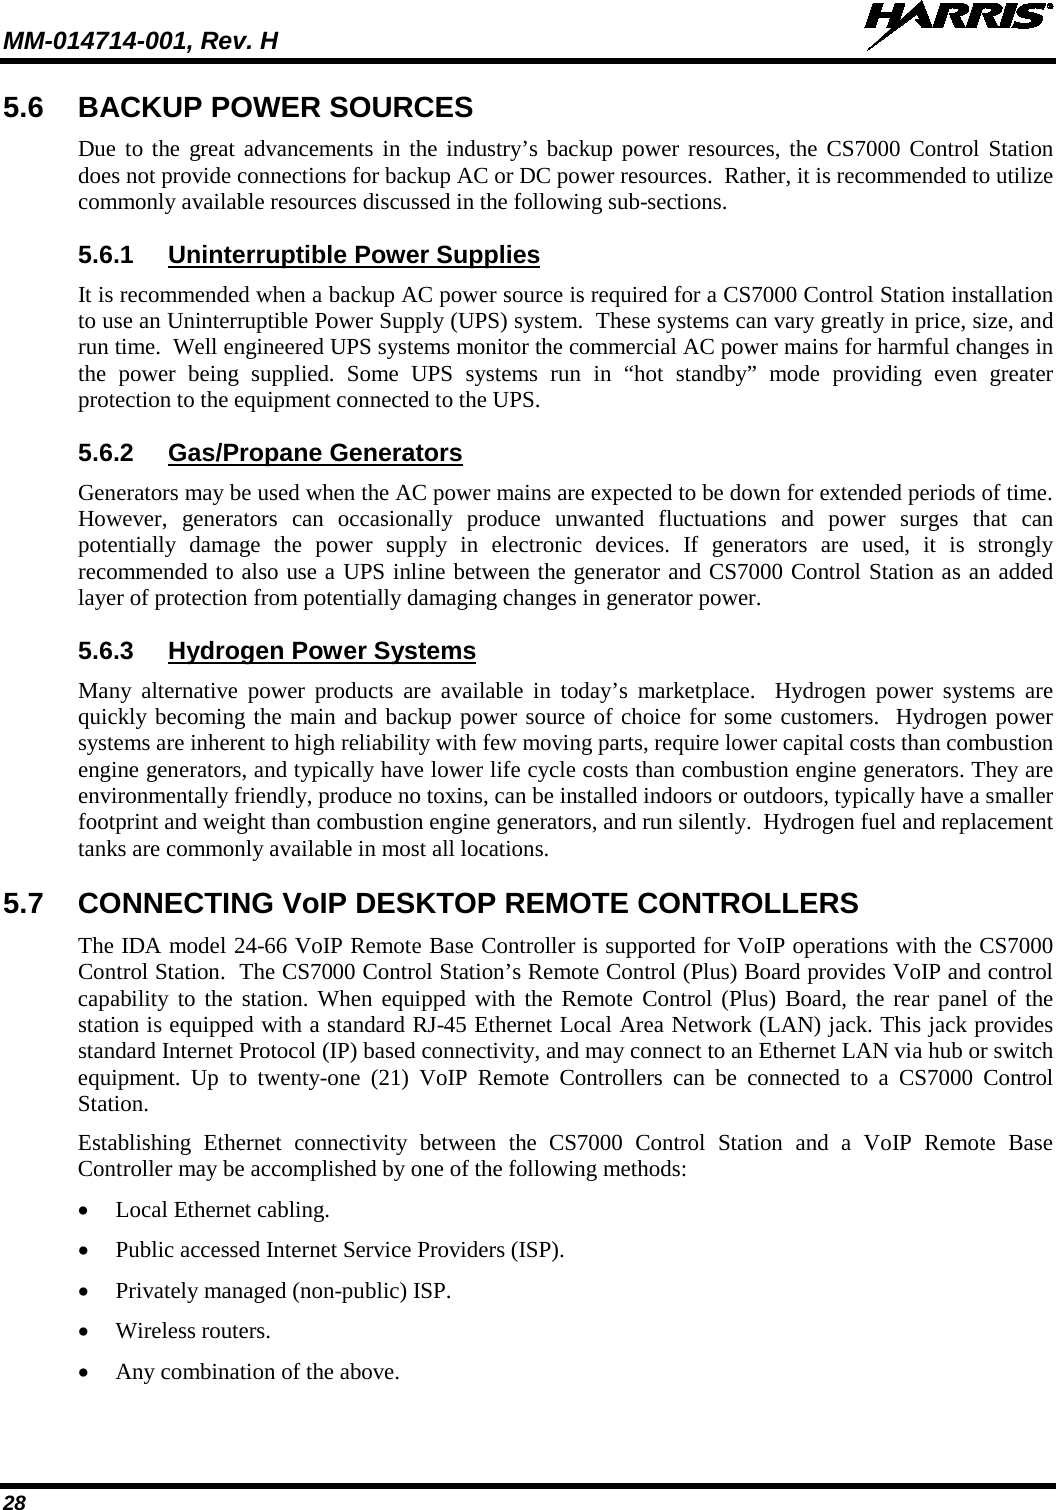 MM-014714-001, Rev. H   28 5.6 BACKUP POWER SOURCES Due to the great advancements in the industry’s backup power resources, the CS7000 Control Station does not provide connections for backup AC or DC power resources.  Rather, it is recommended to utilize commonly available resources discussed in the following sub-sections. 5.6.1 Uninterruptible Power Supplies It is recommended when a backup AC power source is required for a CS7000 Control Station installation to use an Uninterruptible Power Supply (UPS) system.  These systems can vary greatly in price, size, and run time.  Well engineered UPS systems monitor the commercial AC power mains for harmful changes in the power being supplied. Some UPS systems run in “hot standby” mode providing even greater protection to the equipment connected to the UPS. 5.6.2 Gas/Propane Generators Generators may be used when the AC power mains are expected to be down for extended periods of time.  However, generators can occasionally produce unwanted fluctuations and power surges that can potentially damage the power supply in electronic devices. If generators are used, it is strongly recommended to also use a UPS inline between the generator and CS7000 Control Station as an added layer of protection from potentially damaging changes in generator power. 5.6.3 Hydrogen Power Systems Many alternative power products are available in today’s marketplace.  Hydrogen power systems are quickly becoming the main and backup power source of choice for some customers.  Hydrogen power systems are inherent to high reliability with few moving parts, require lower capital costs than combustion engine generators, and typically have lower life cycle costs than combustion engine generators. They are environmentally friendly, produce no toxins, can be installed indoors or outdoors, typically have a smaller footprint and weight than combustion engine generators, and run silently.  Hydrogen fuel and replacement tanks are commonly available in most all locations. 5.7 CONNECTING VoIP DESKTOP REMOTE CONTROLLERS The IDA model 24-66 VoIP Remote Base Controller is supported for VoIP operations with the CS7000 Control Station.  The CS7000 Control Station’s Remote Control (Plus) Board provides VoIP and control capability to the station. When equipped with the Remote Control (Plus) Board, the rear panel of the station is equipped with a standard RJ-45 Ethernet Local Area Network (LAN) jack. This jack provides standard Internet Protocol (IP) based connectivity, and may connect to an Ethernet LAN via hub or switch equipment.  Up to twenty-one (21) VoIP Remote Controllers can be connected to a CS7000 Control Station. Establishing  Ethernet connectivity between the CS7000 Control Station and a VoIP Remote Base Controller may be accomplished by one of the following methods: • Local Ethernet cabling. • Public accessed Internet Service Providers (ISP). • Privately managed (non-public) ISP. • Wireless routers. • Any combination of the above. 